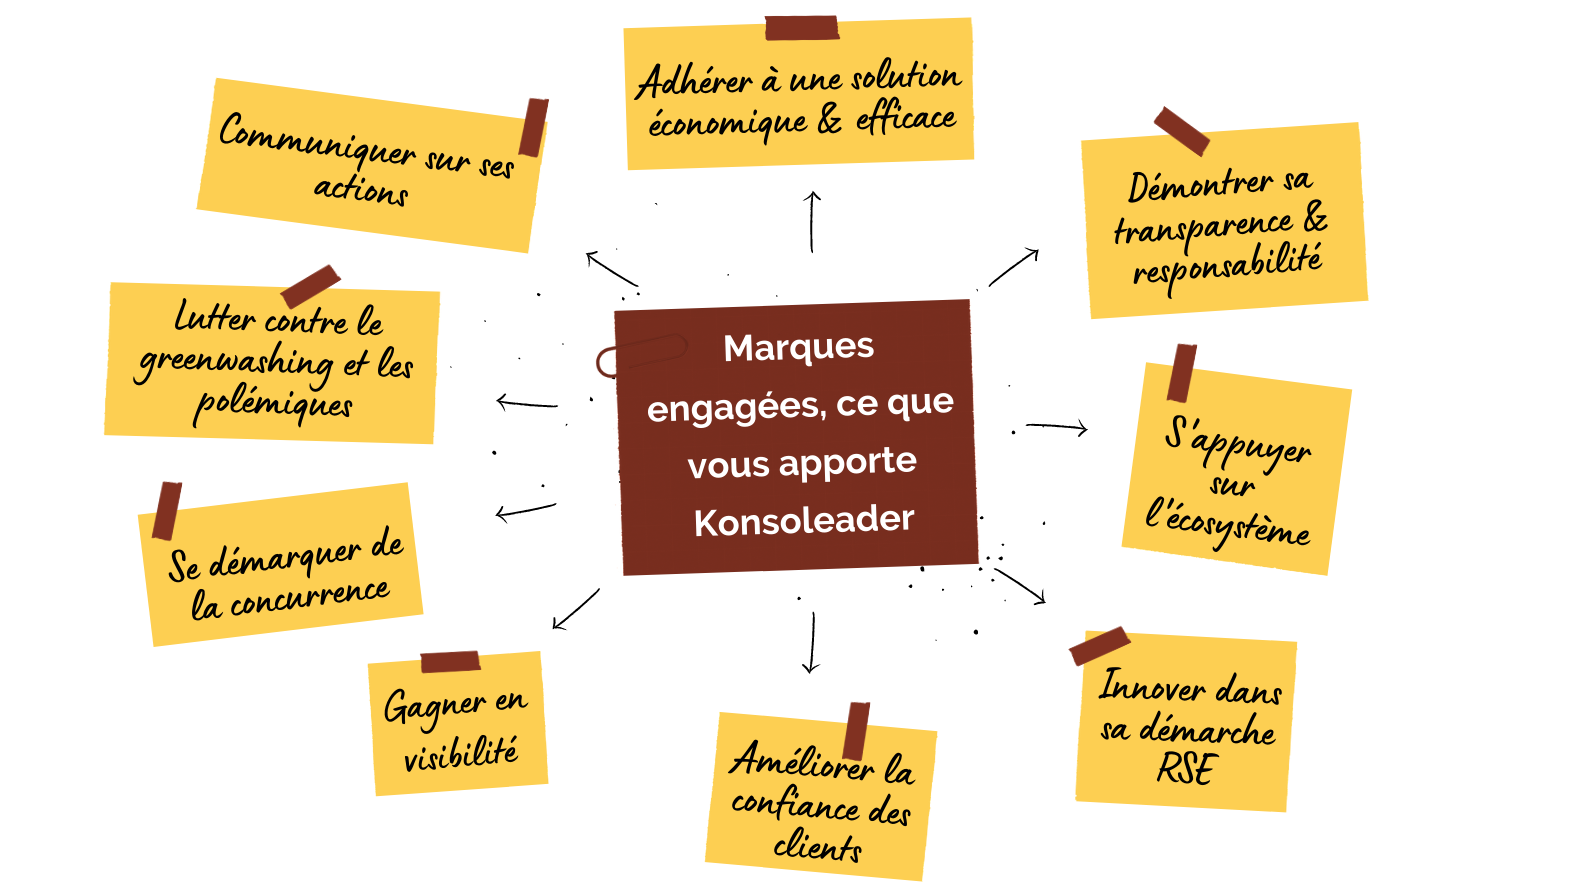 Marques engagees ce que vous apporte Konsoleader